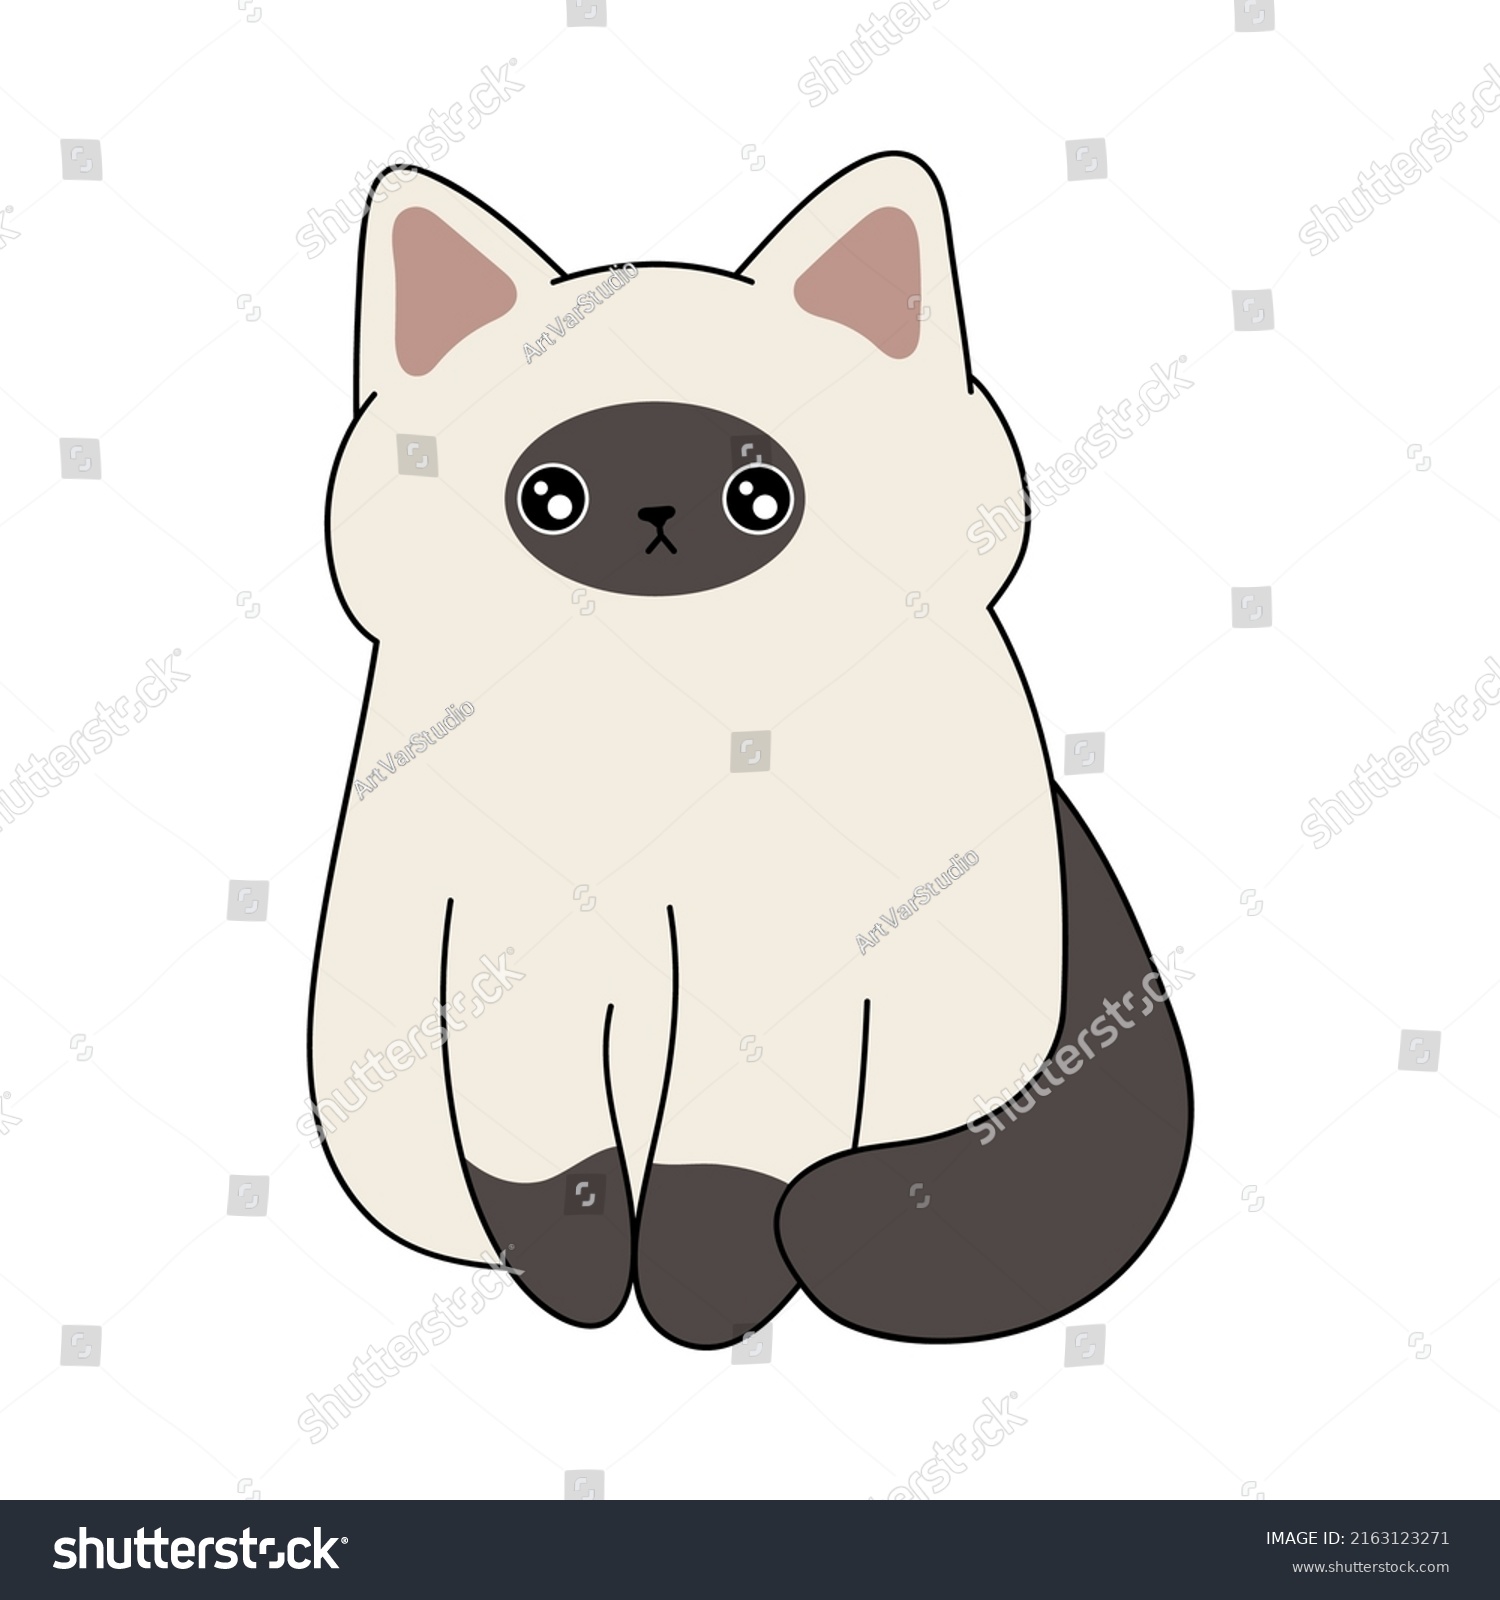 SVG of Cute Siamese cat with an indifferent face. Vector illustration of a cute kitten. Cute little illustration of cat for kids, baby book, fairy tales, covers, baby shower invitation, textile t-shirt. svg